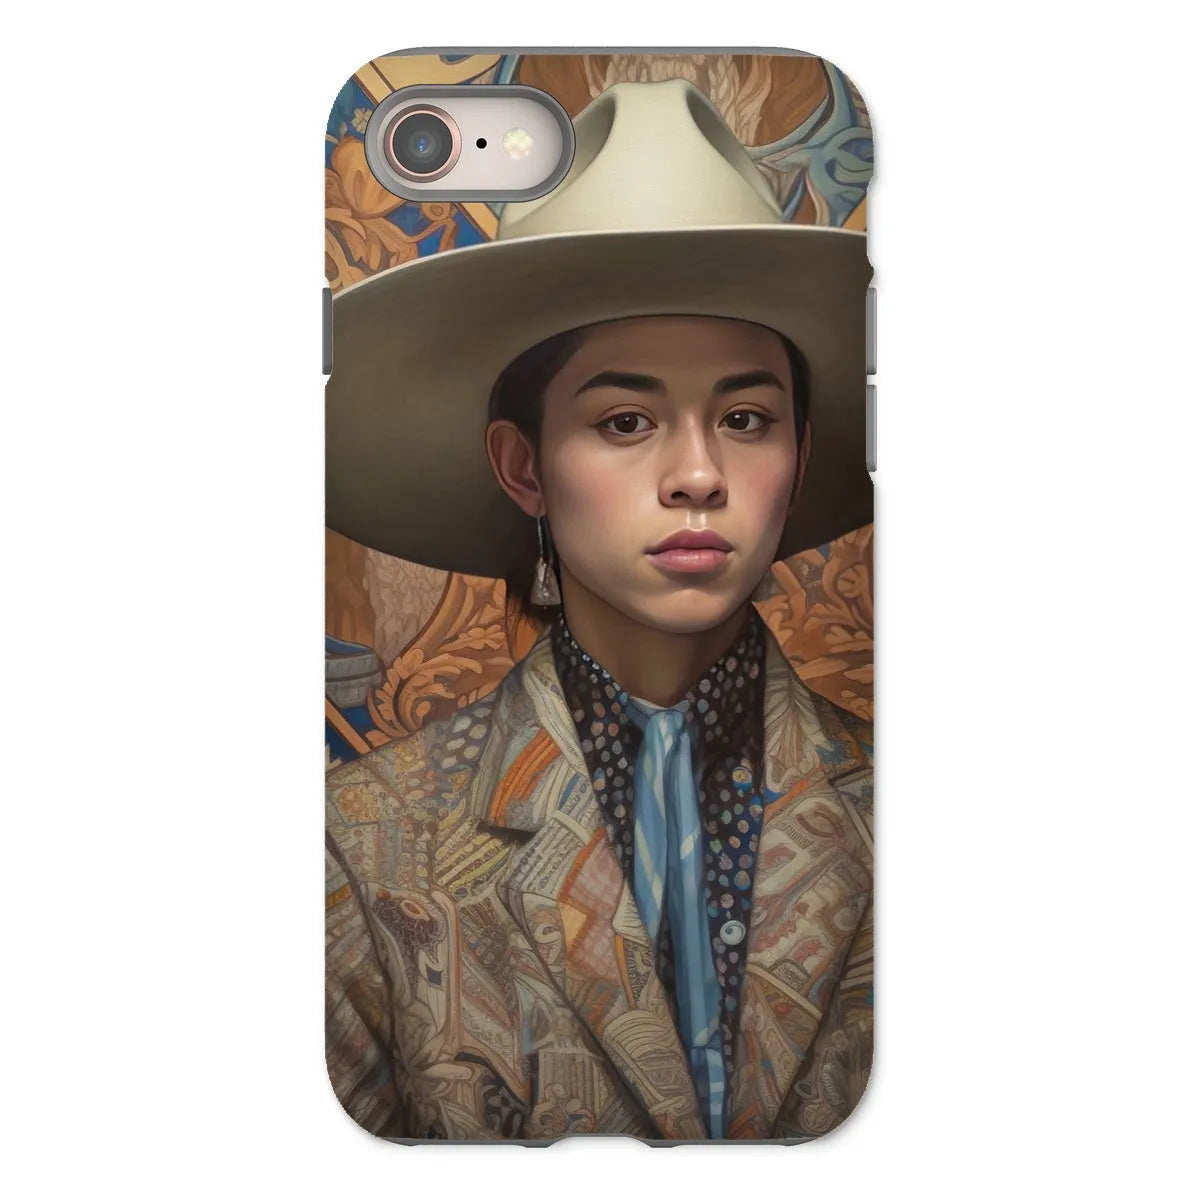 Angel The Transgender Cowboy - F2m Outlaw Art Phone Case - Iphone 8 / Matte - Mobile Phone Cases - Aesthetic Art